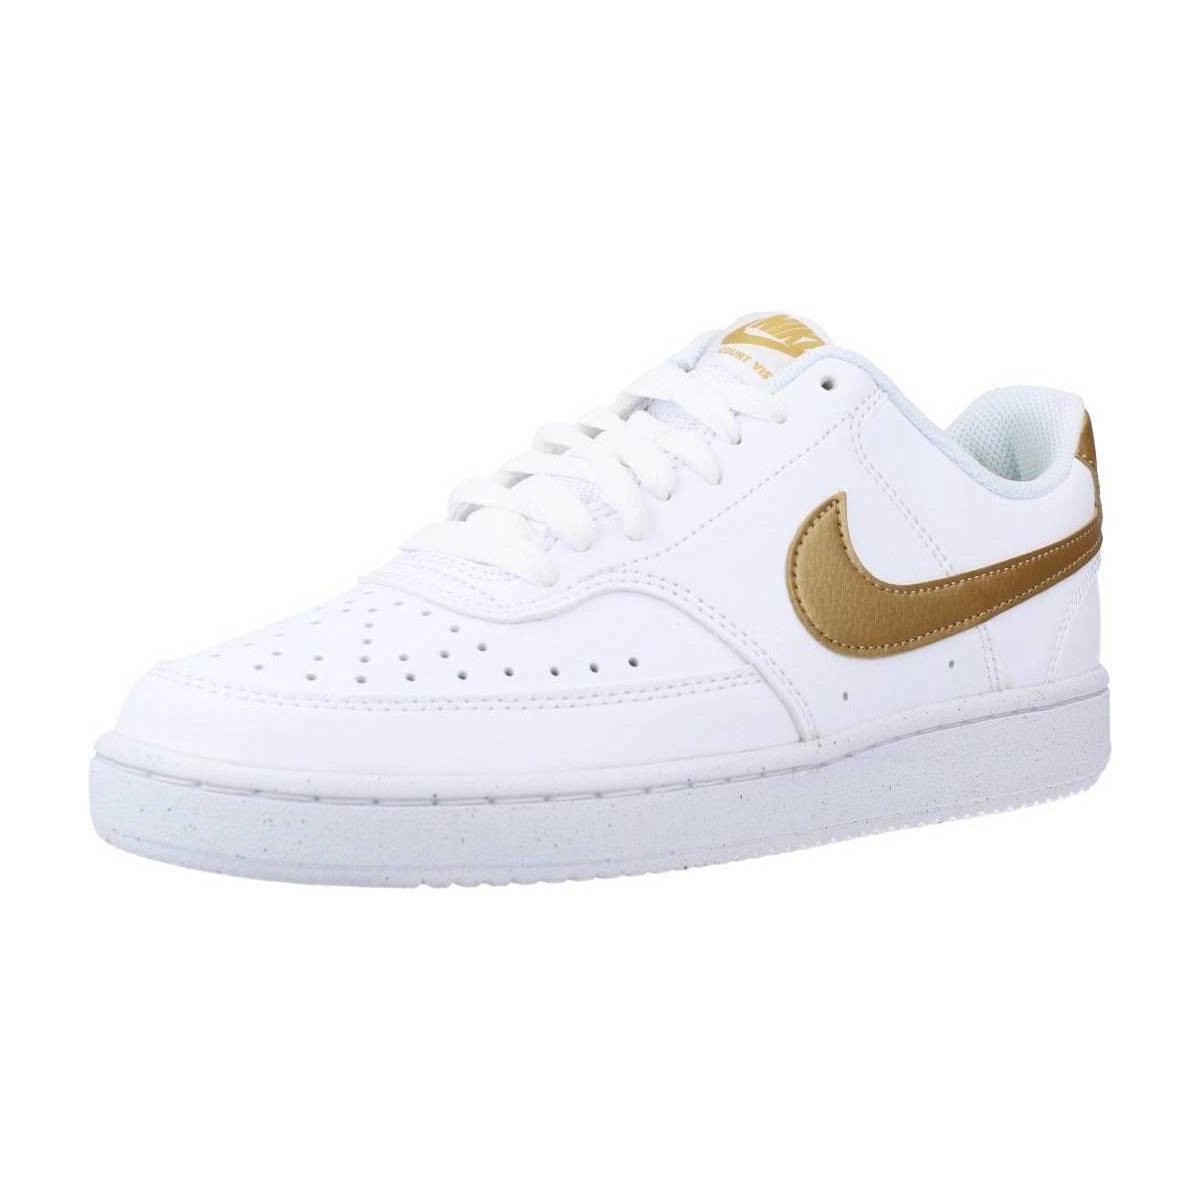 Scarpe Donna Sneakers Nike COURT VISION LOW BE WOM Bianco